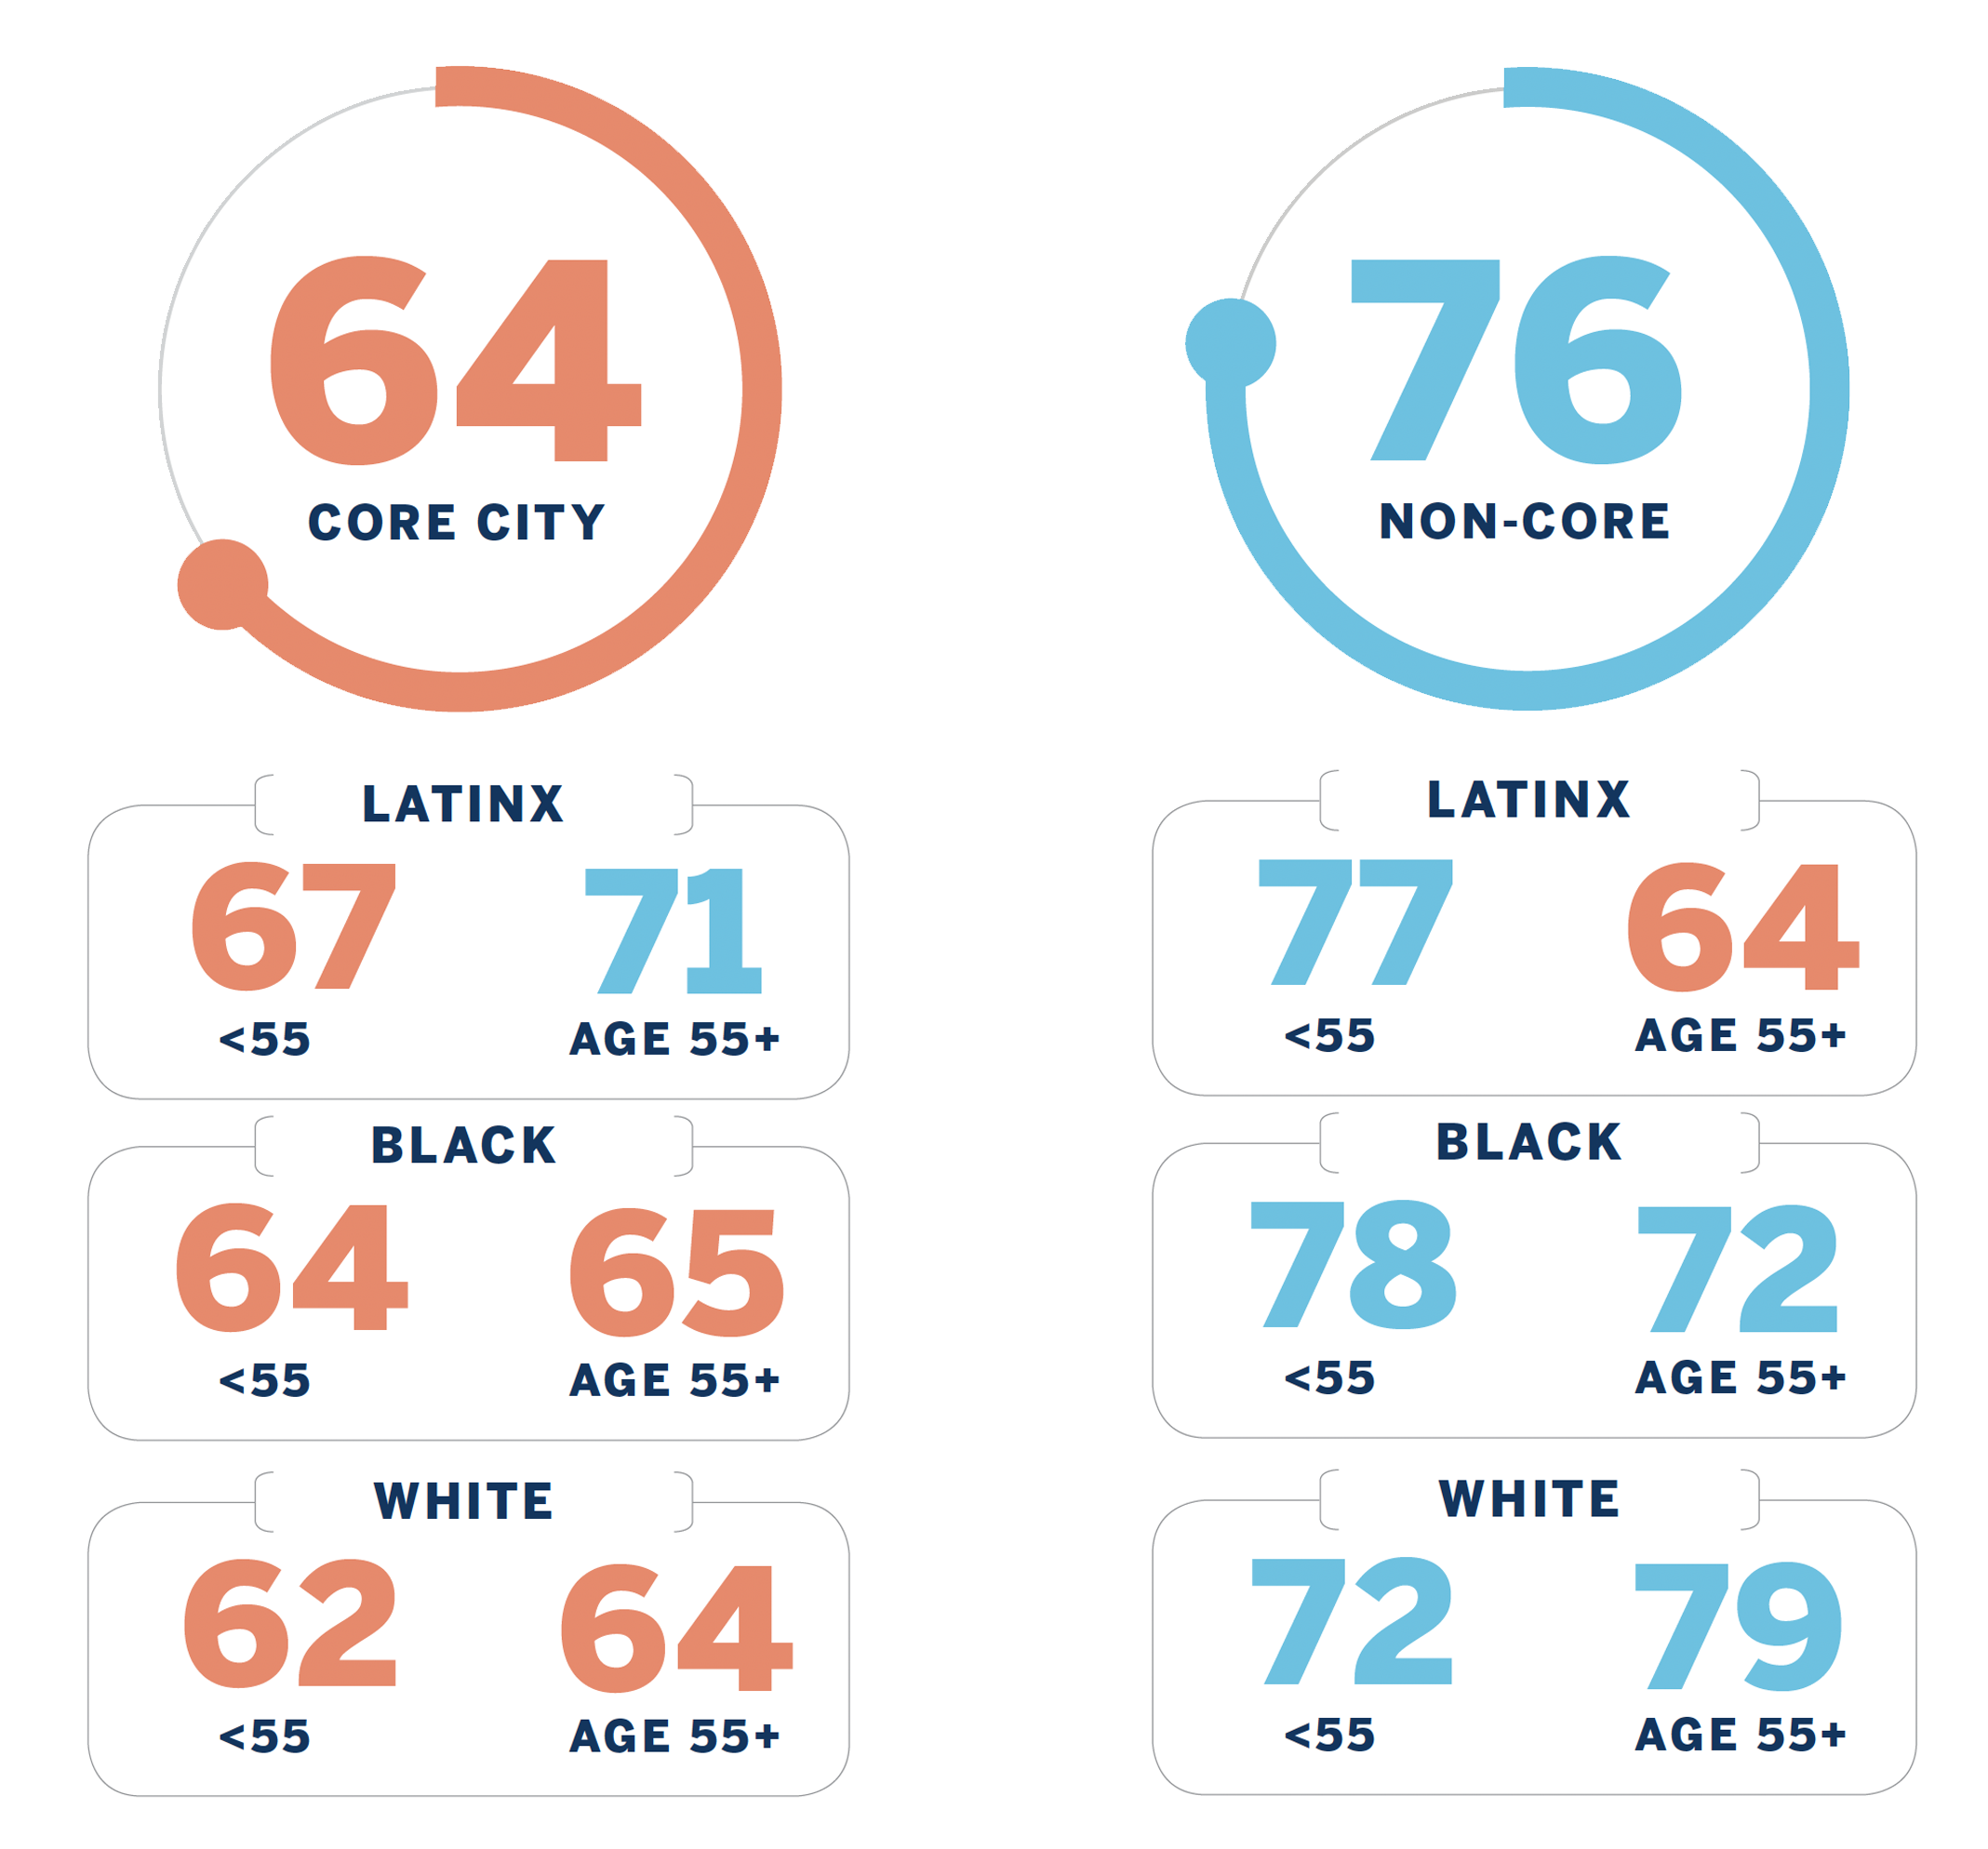 Chart breakdown: Core City: 64 (broken down by Latinx, Black, and White ages less than and over 55) Non-Core: 76 (broken down by Latinx, Black, and White ages less than and over 55)